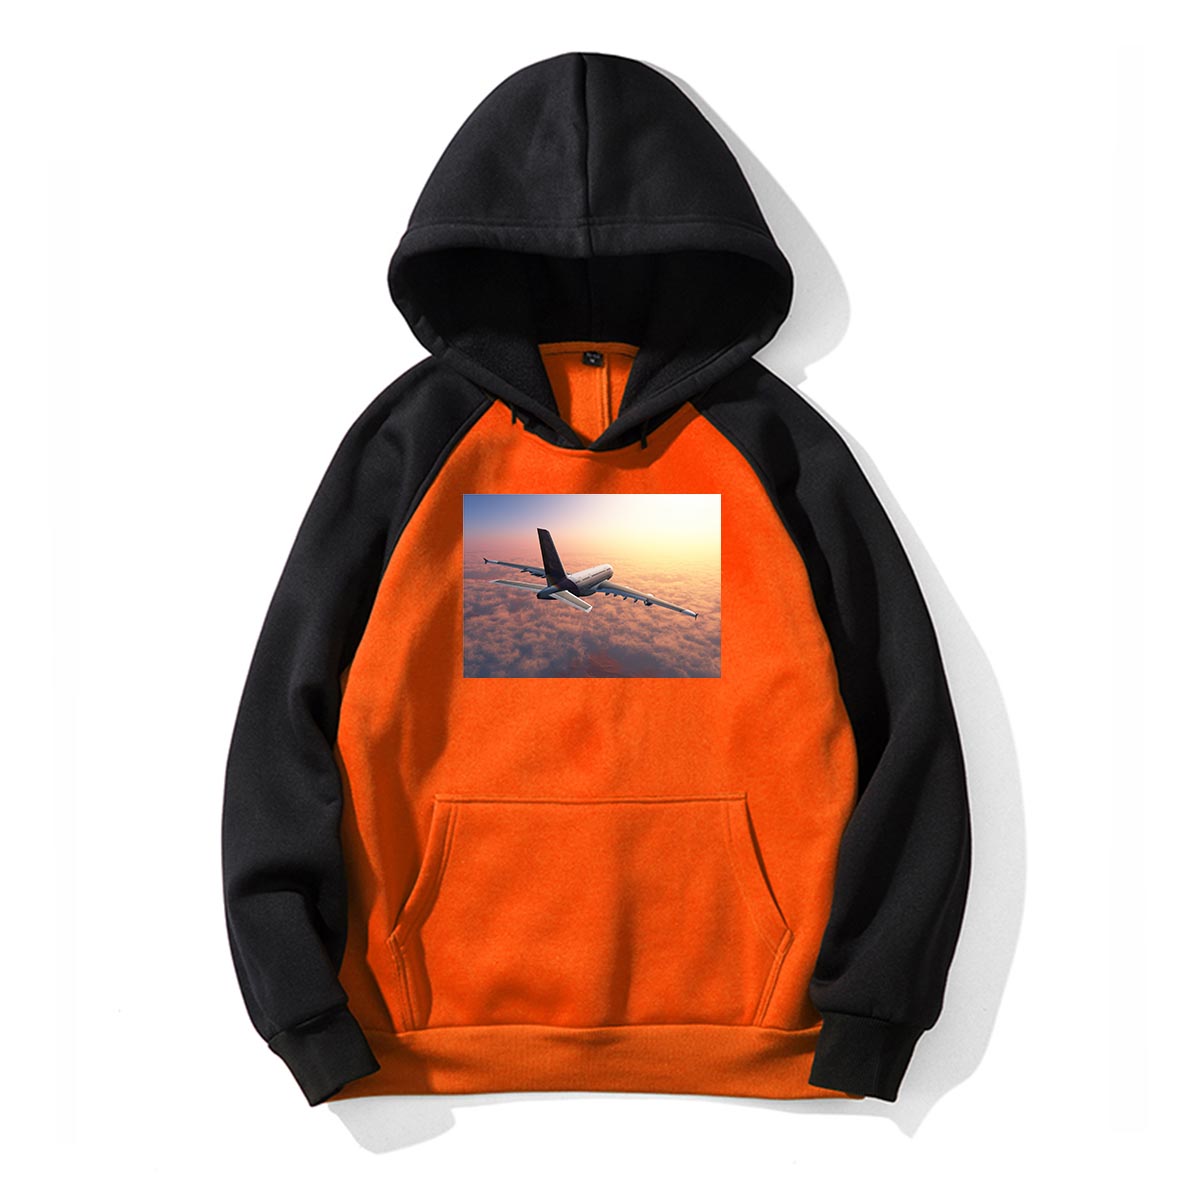 Super Cruising Airbus A380 over Clouds Designed Colourful Hoodies